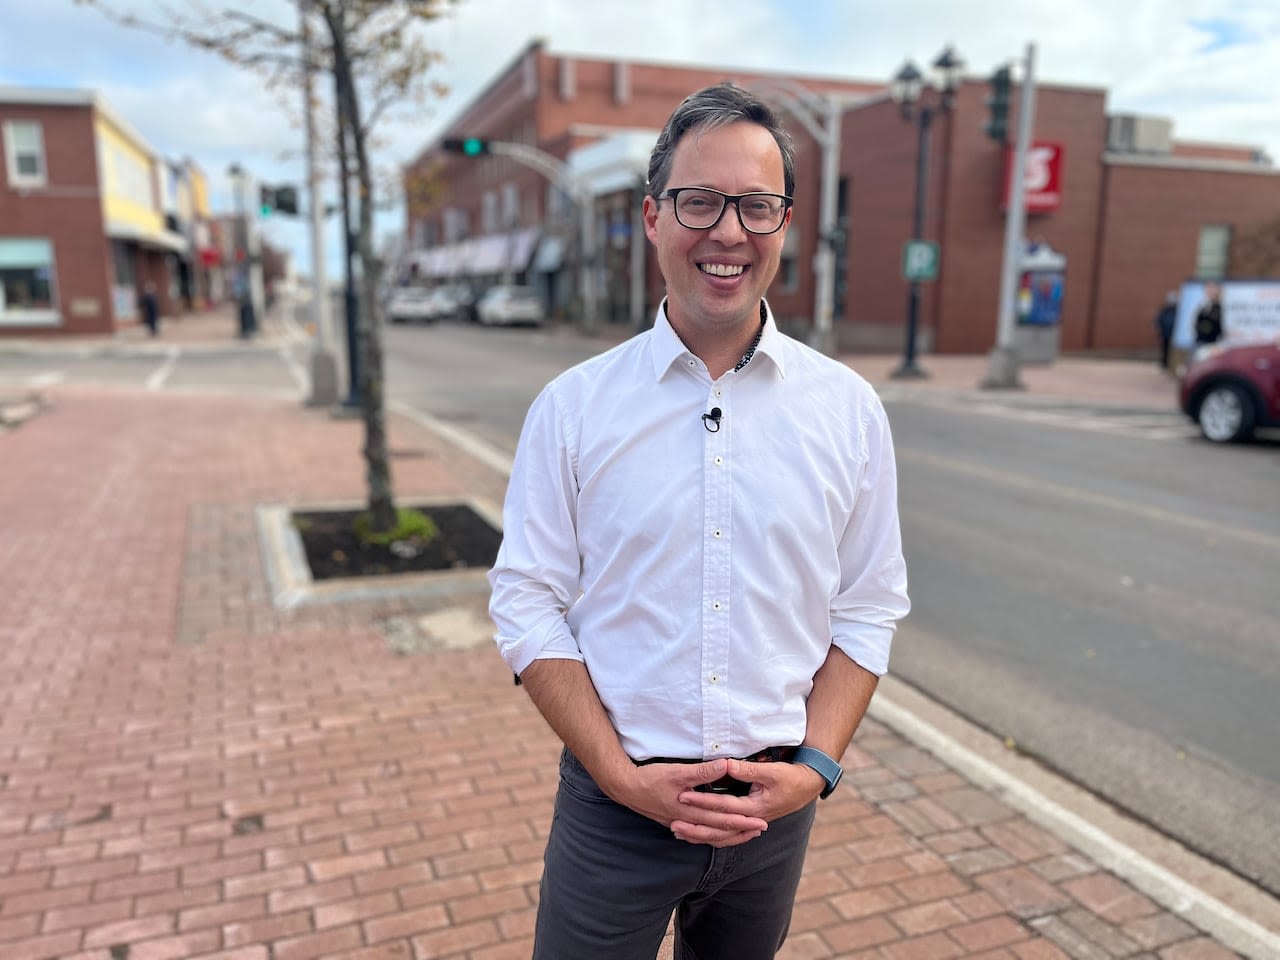 Summerside mayor fears his city will decline under new provincial immigration plan